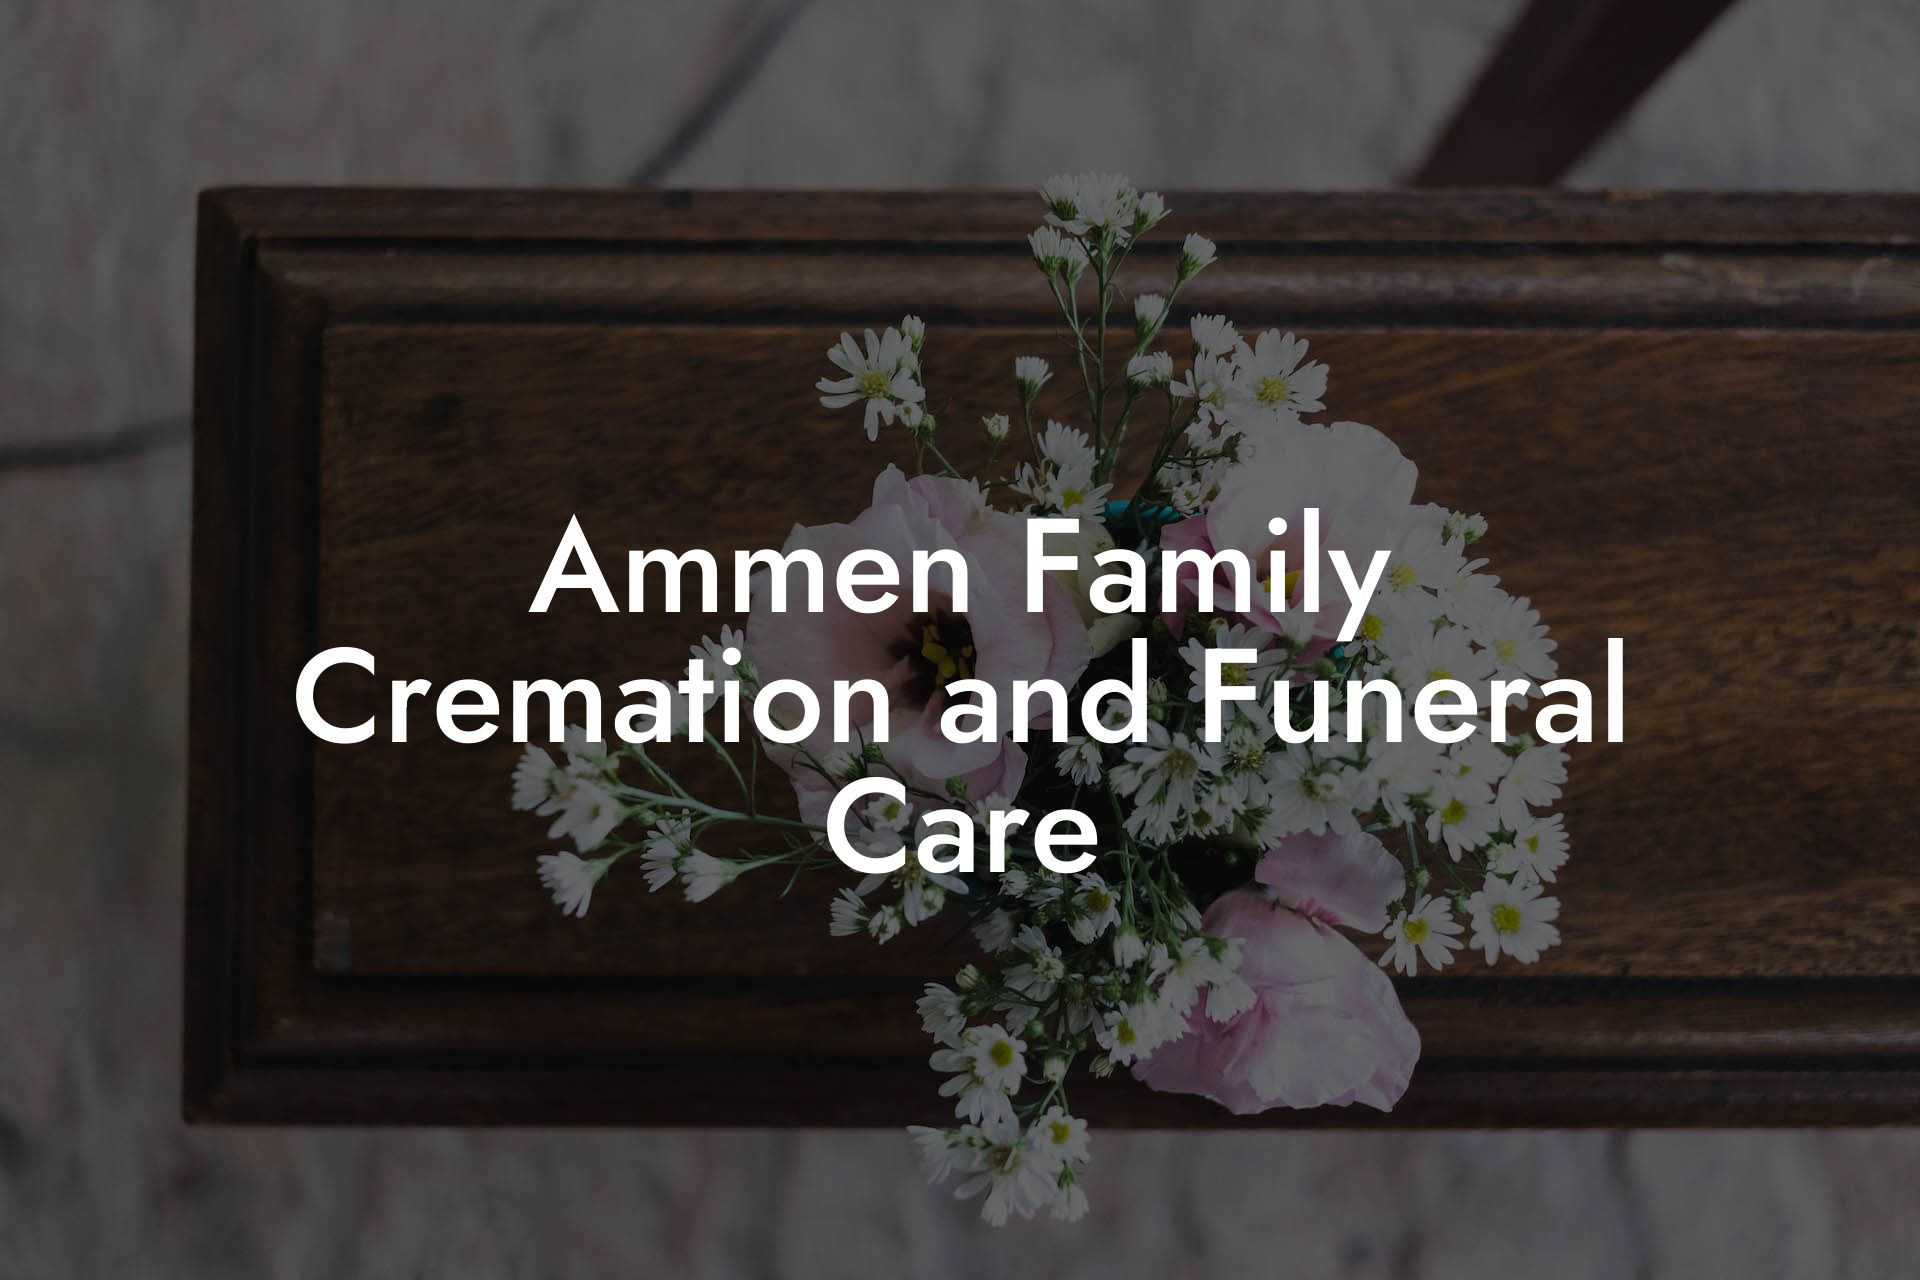 Ammen Family Cremation and Funeral Care